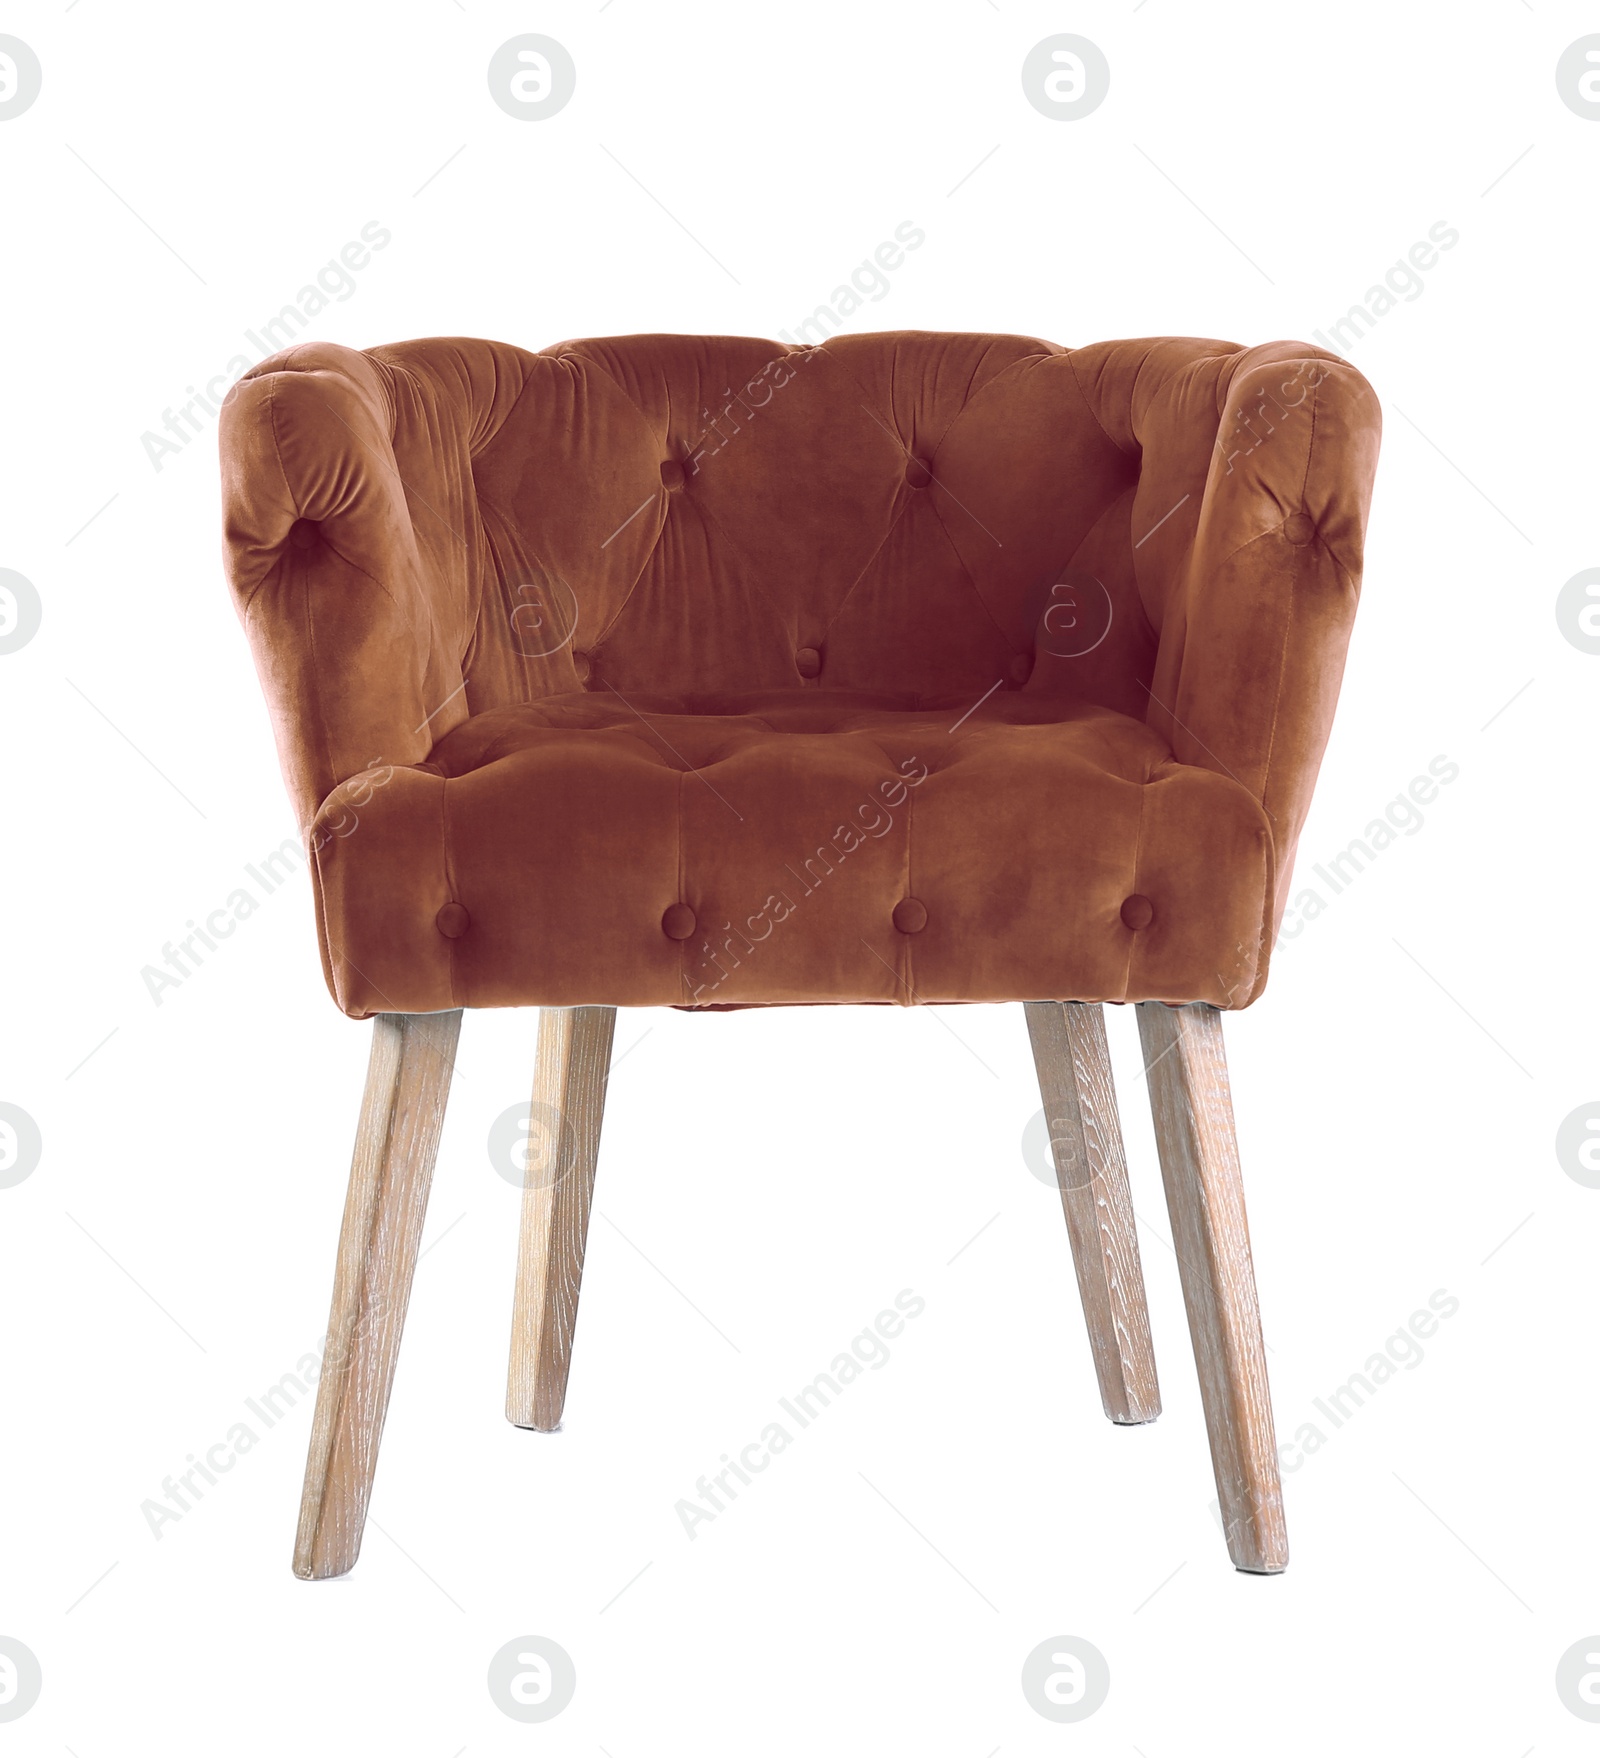 Image of One comfortable brown armchair isolated on white